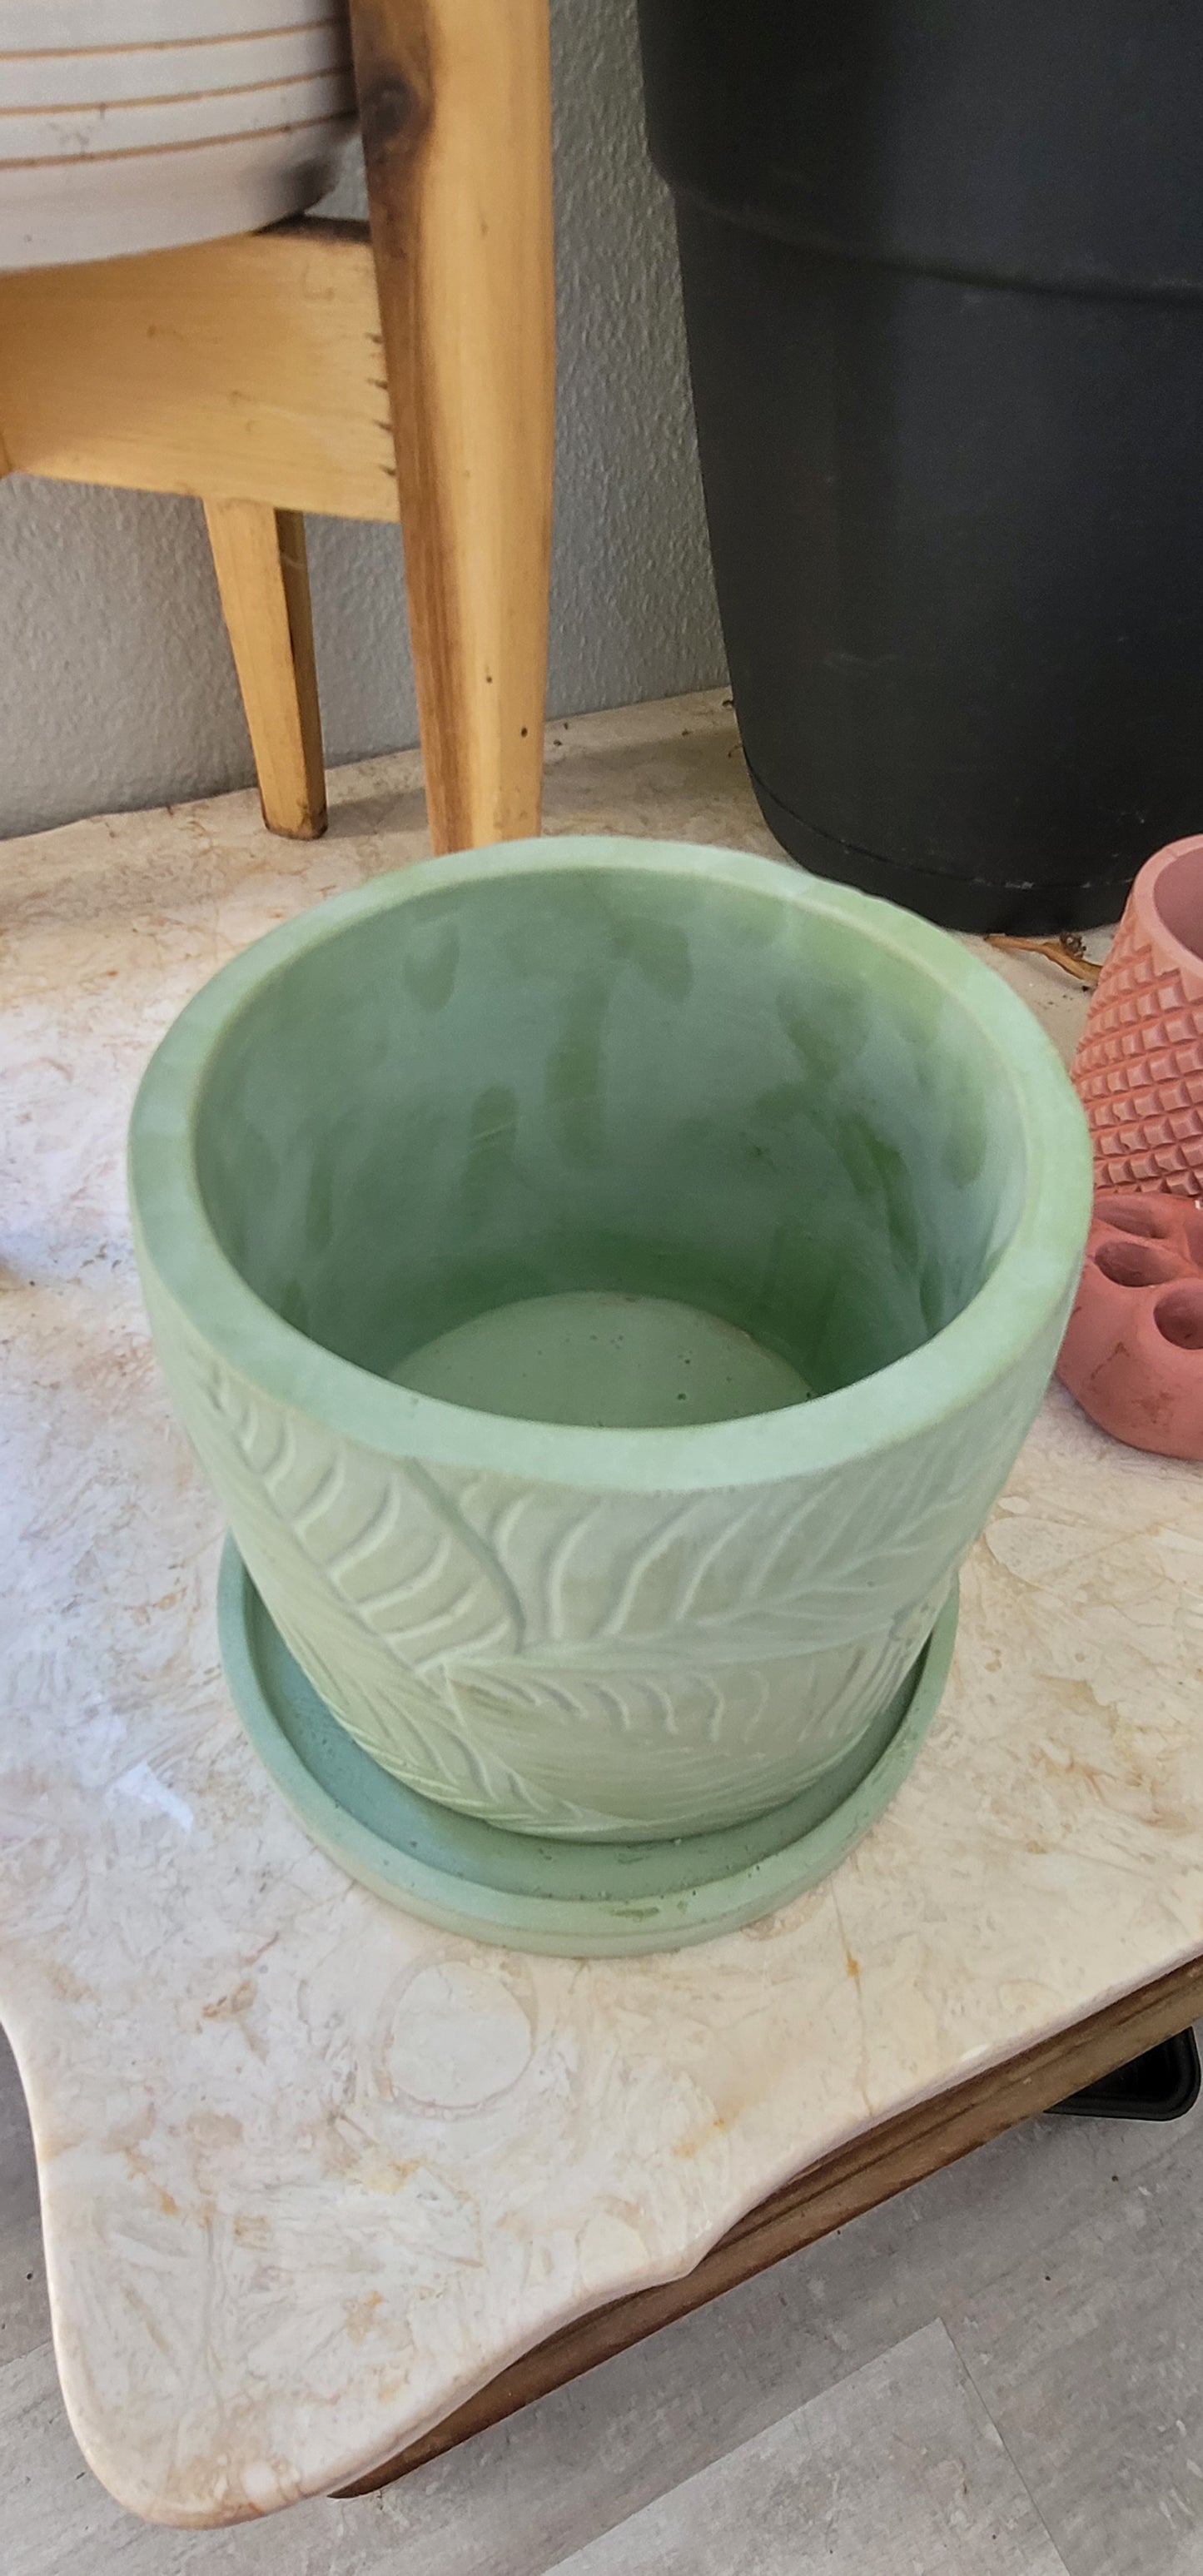 Tropical plant planter with drainage hole and tray